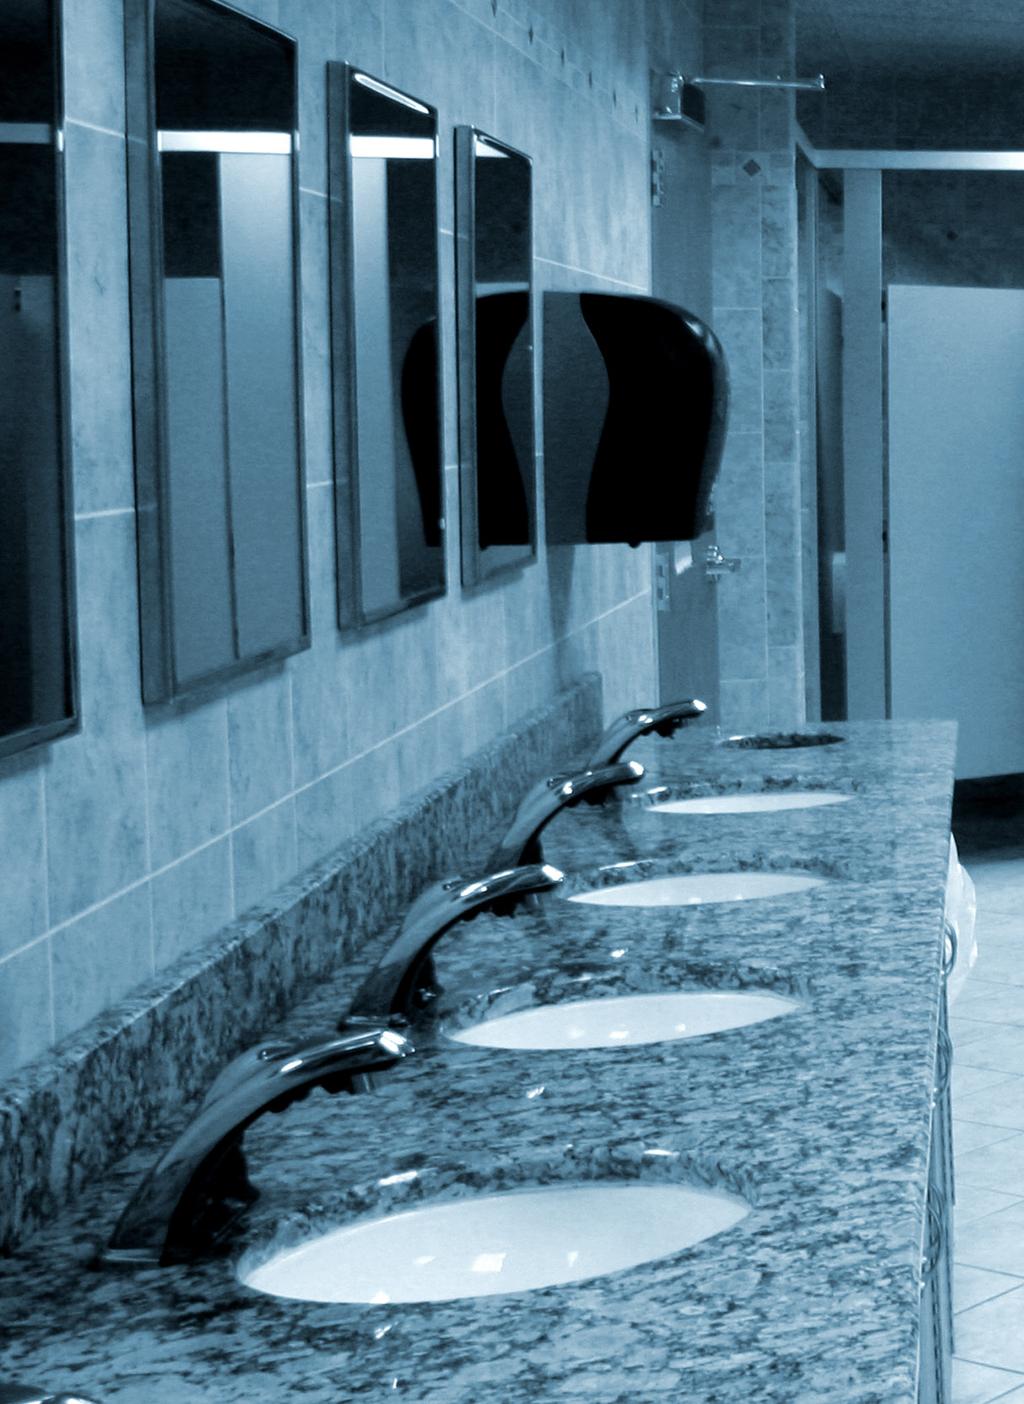 Smart and Tough Restrooms are filled with problems that never rest; like germs, mold,